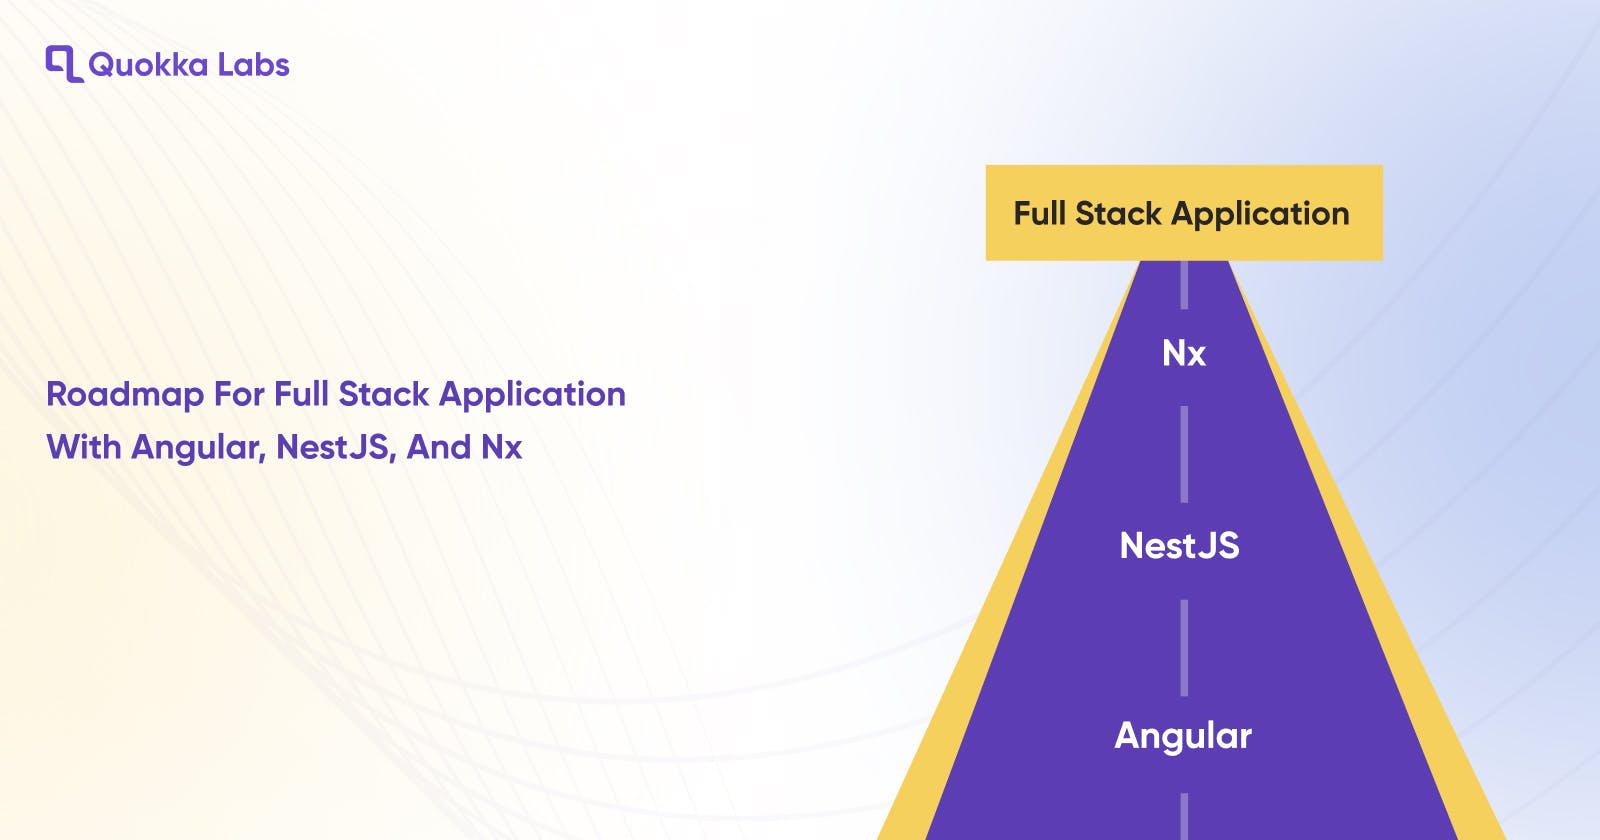 Roadmap for Full Stack Application with Angular, NestJS, and Nx